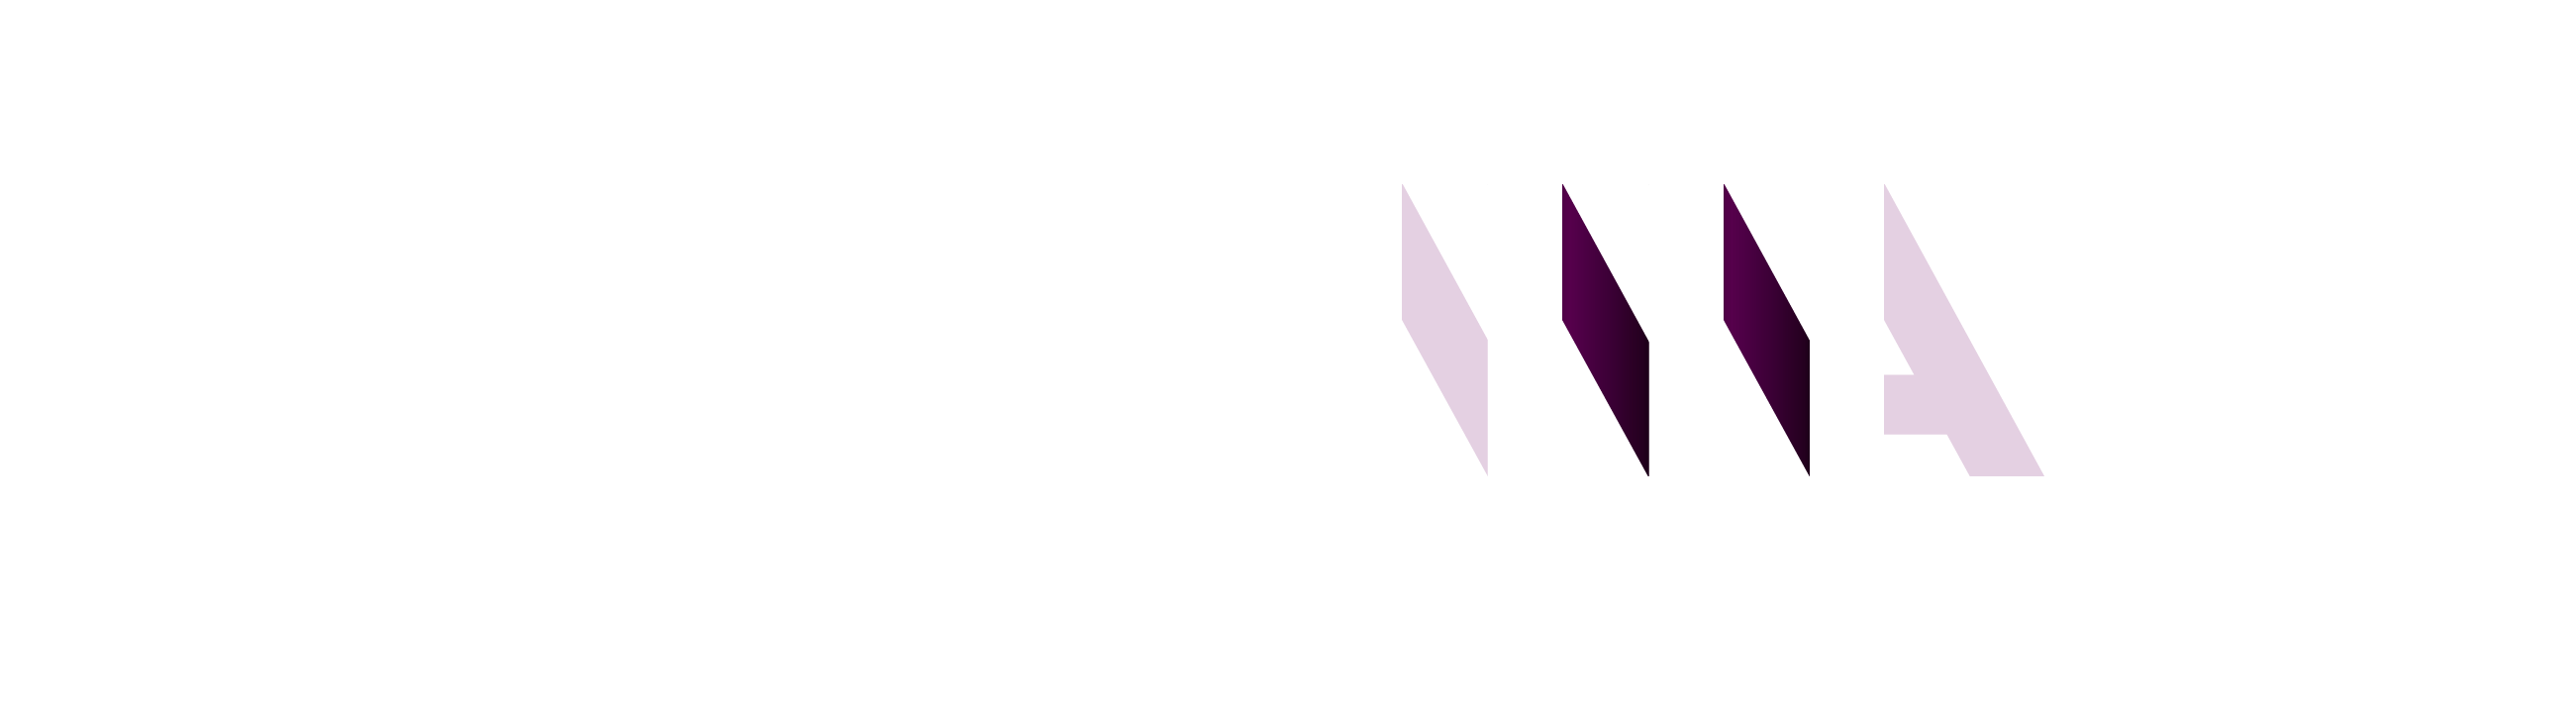 Egale (logo) and National Institute on Ageing (logo)